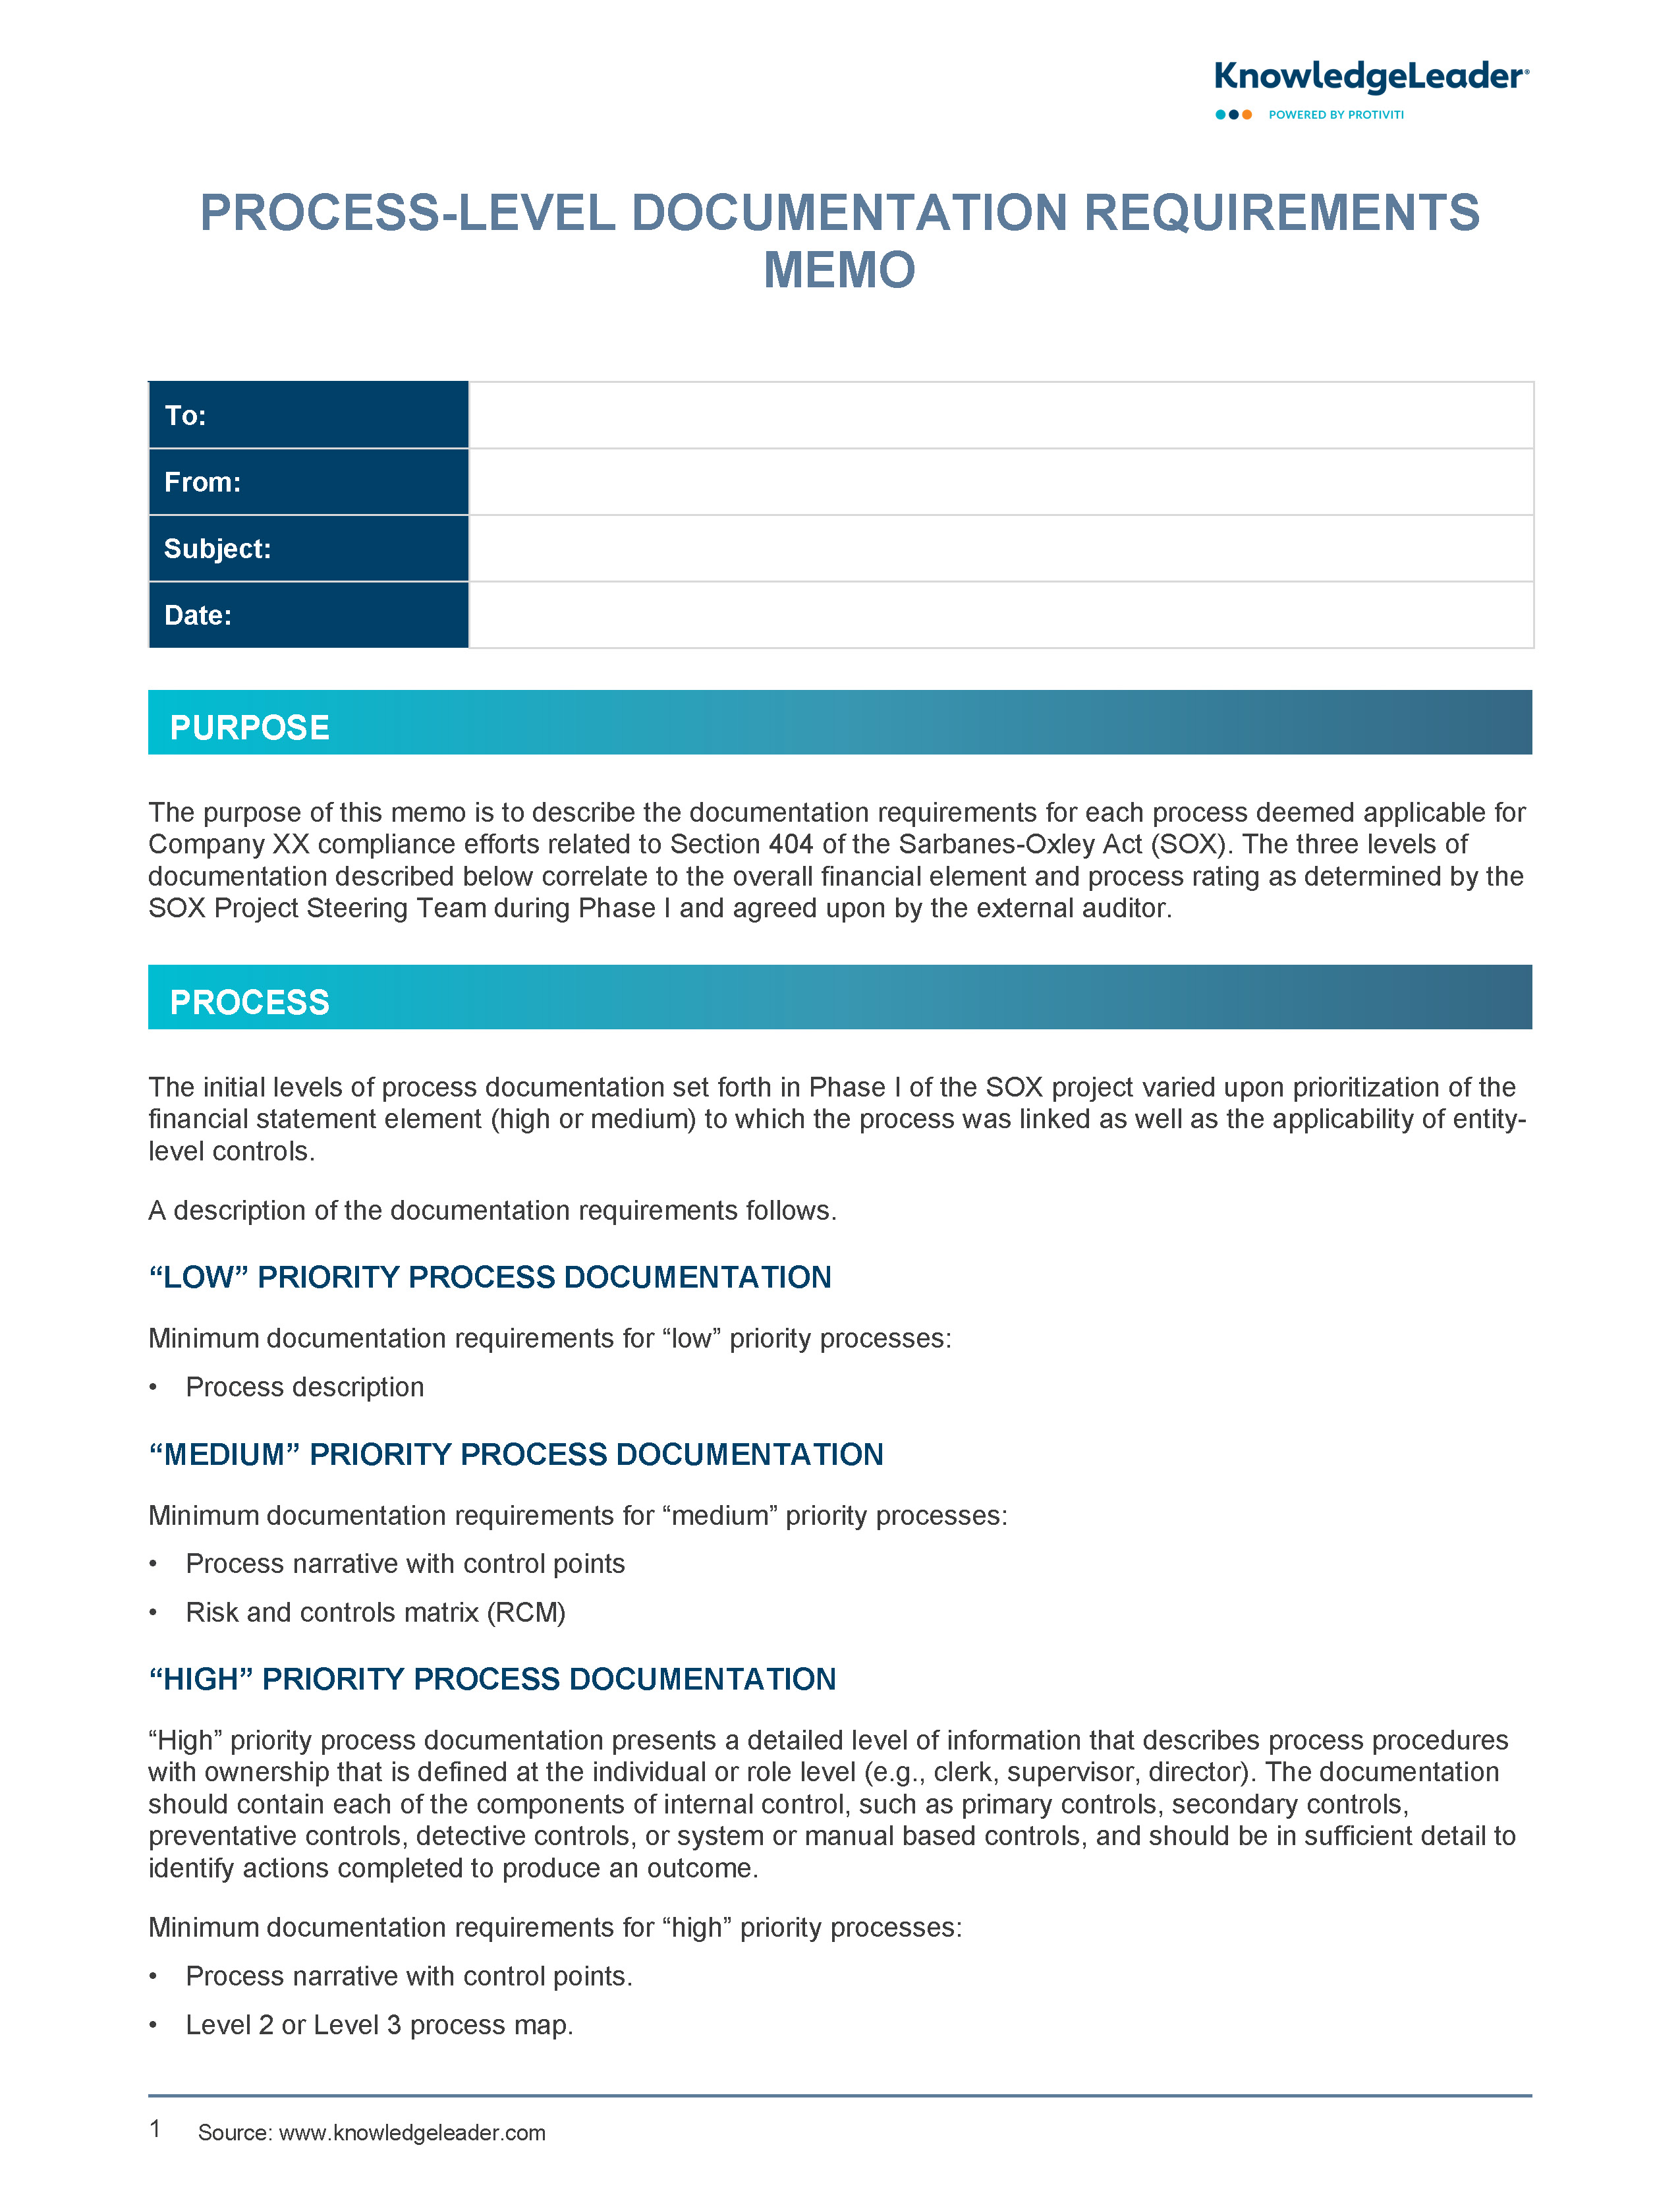 Screenshot of the first page of Process Level Documentation Requirements Memo